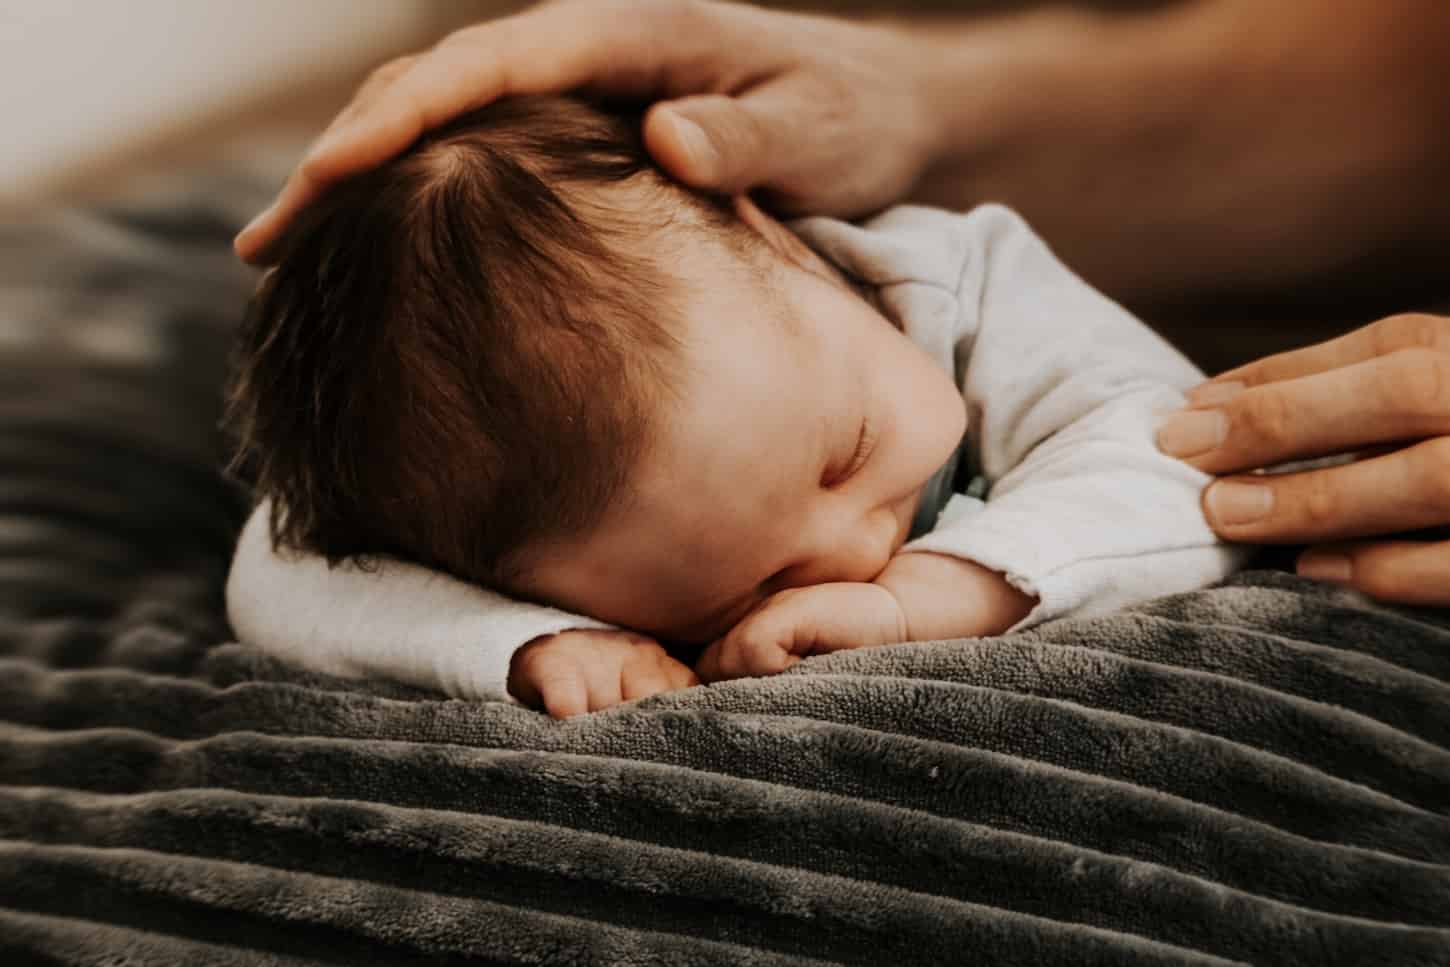 Can All Babies Be Sleep Trained? Do All Babies Need it?